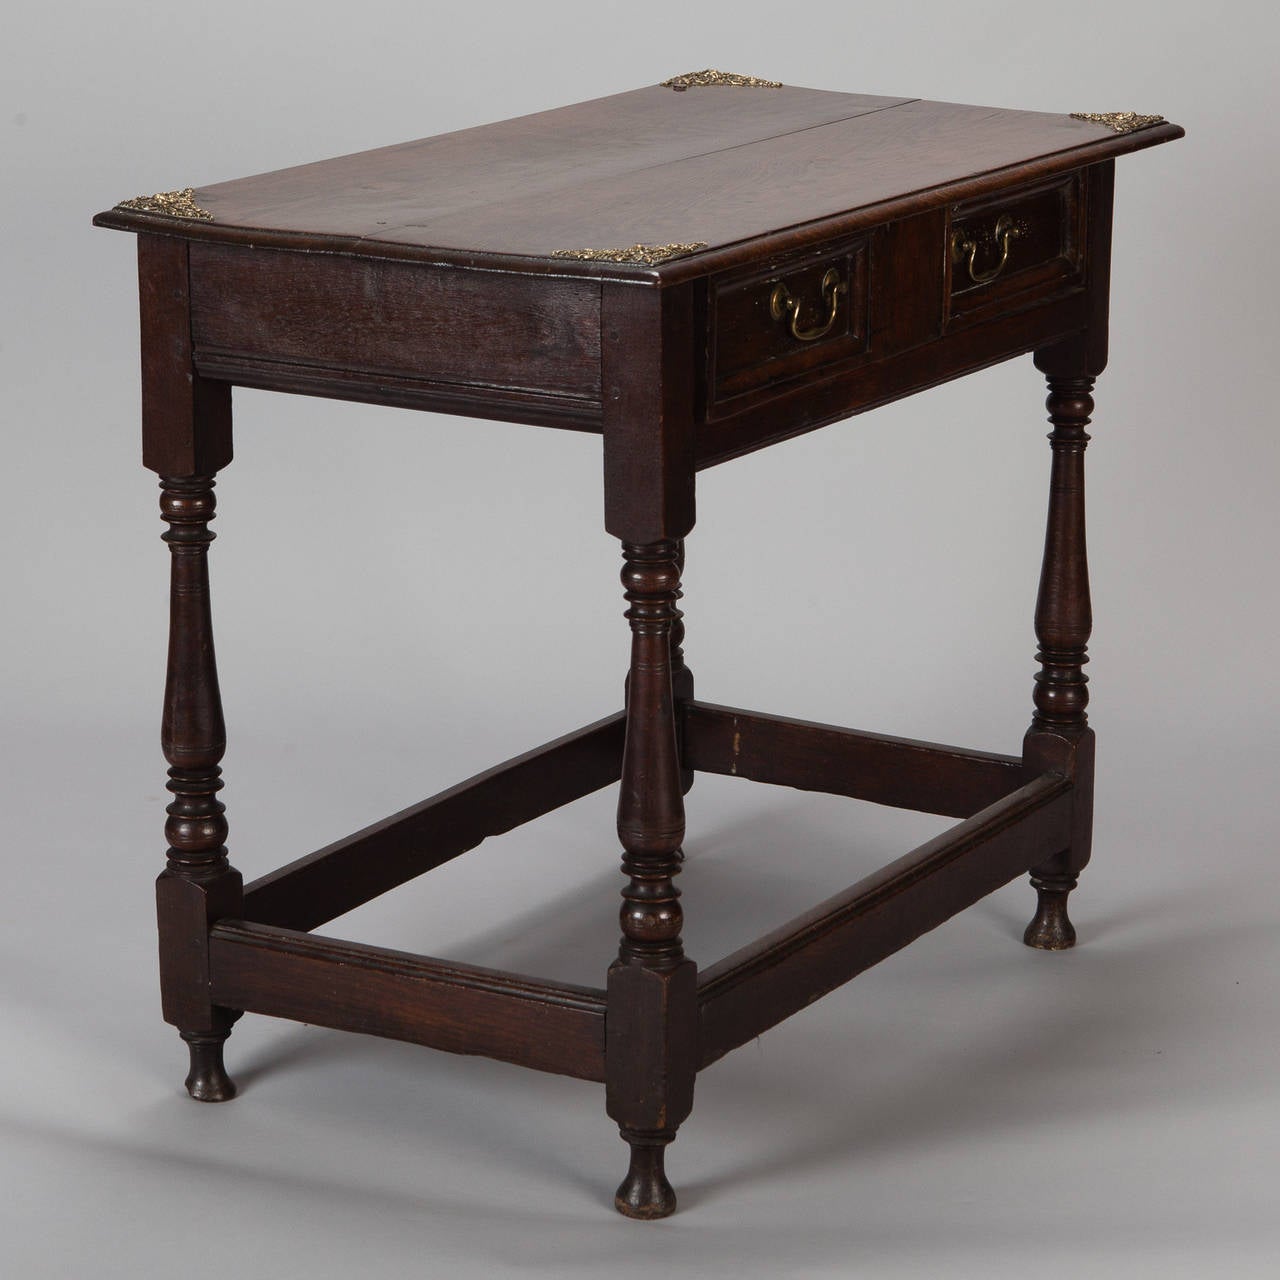 Circa 1830s dark oak side table from Portugal has two drawers, original brass fittings and decorative turned legs.